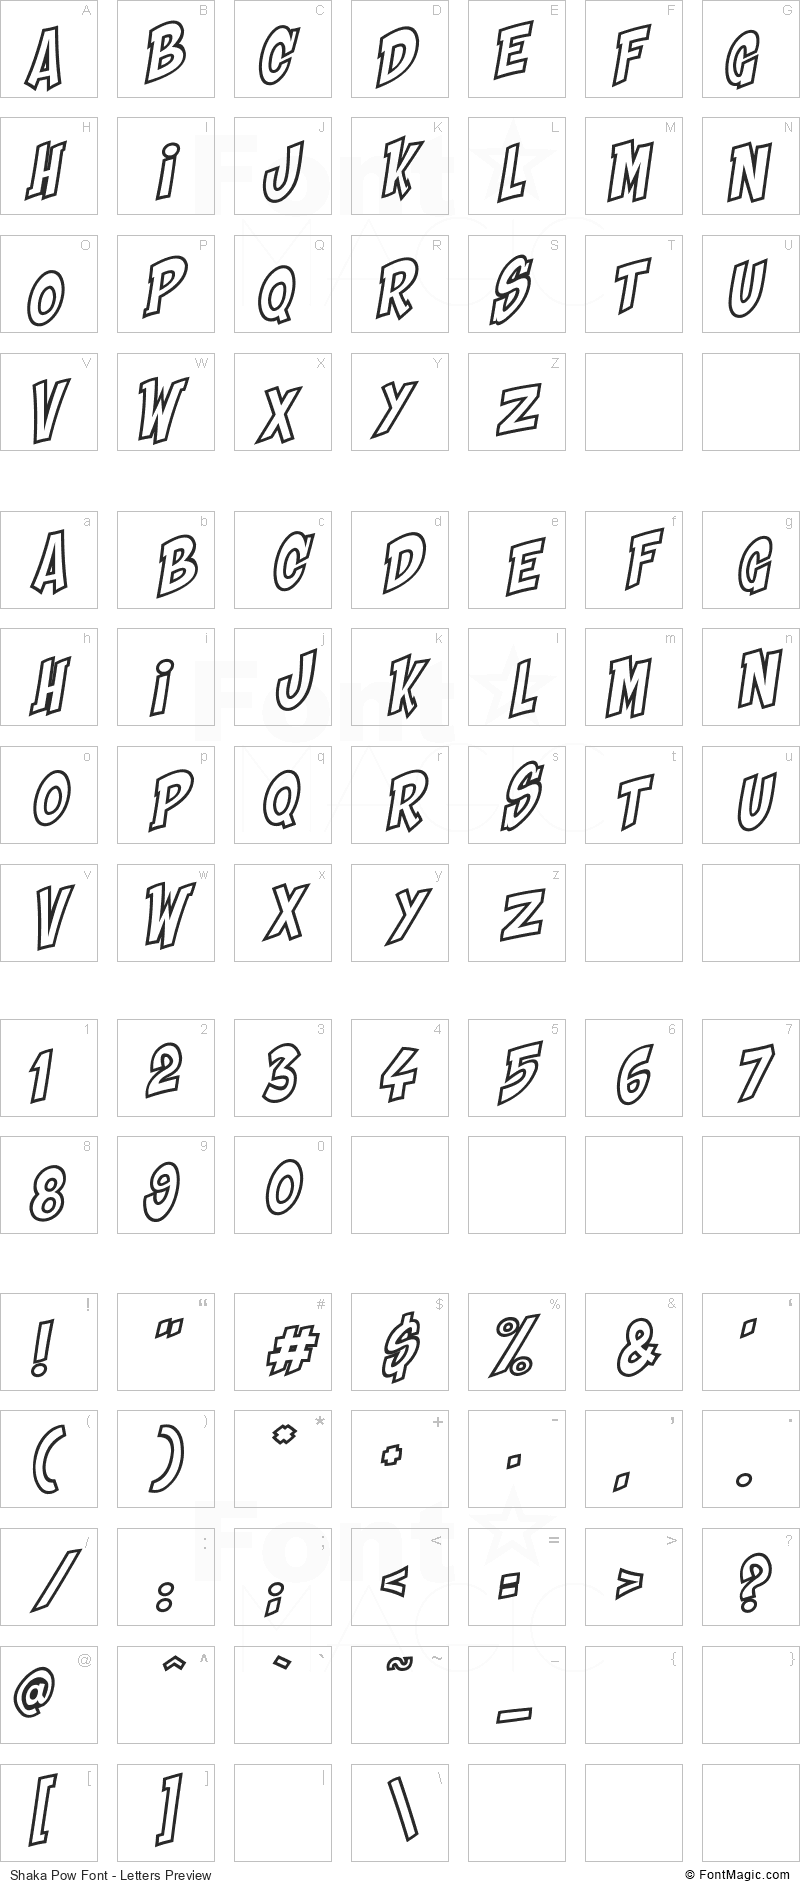 Shaka Pow Font - All Latters Preview Chart